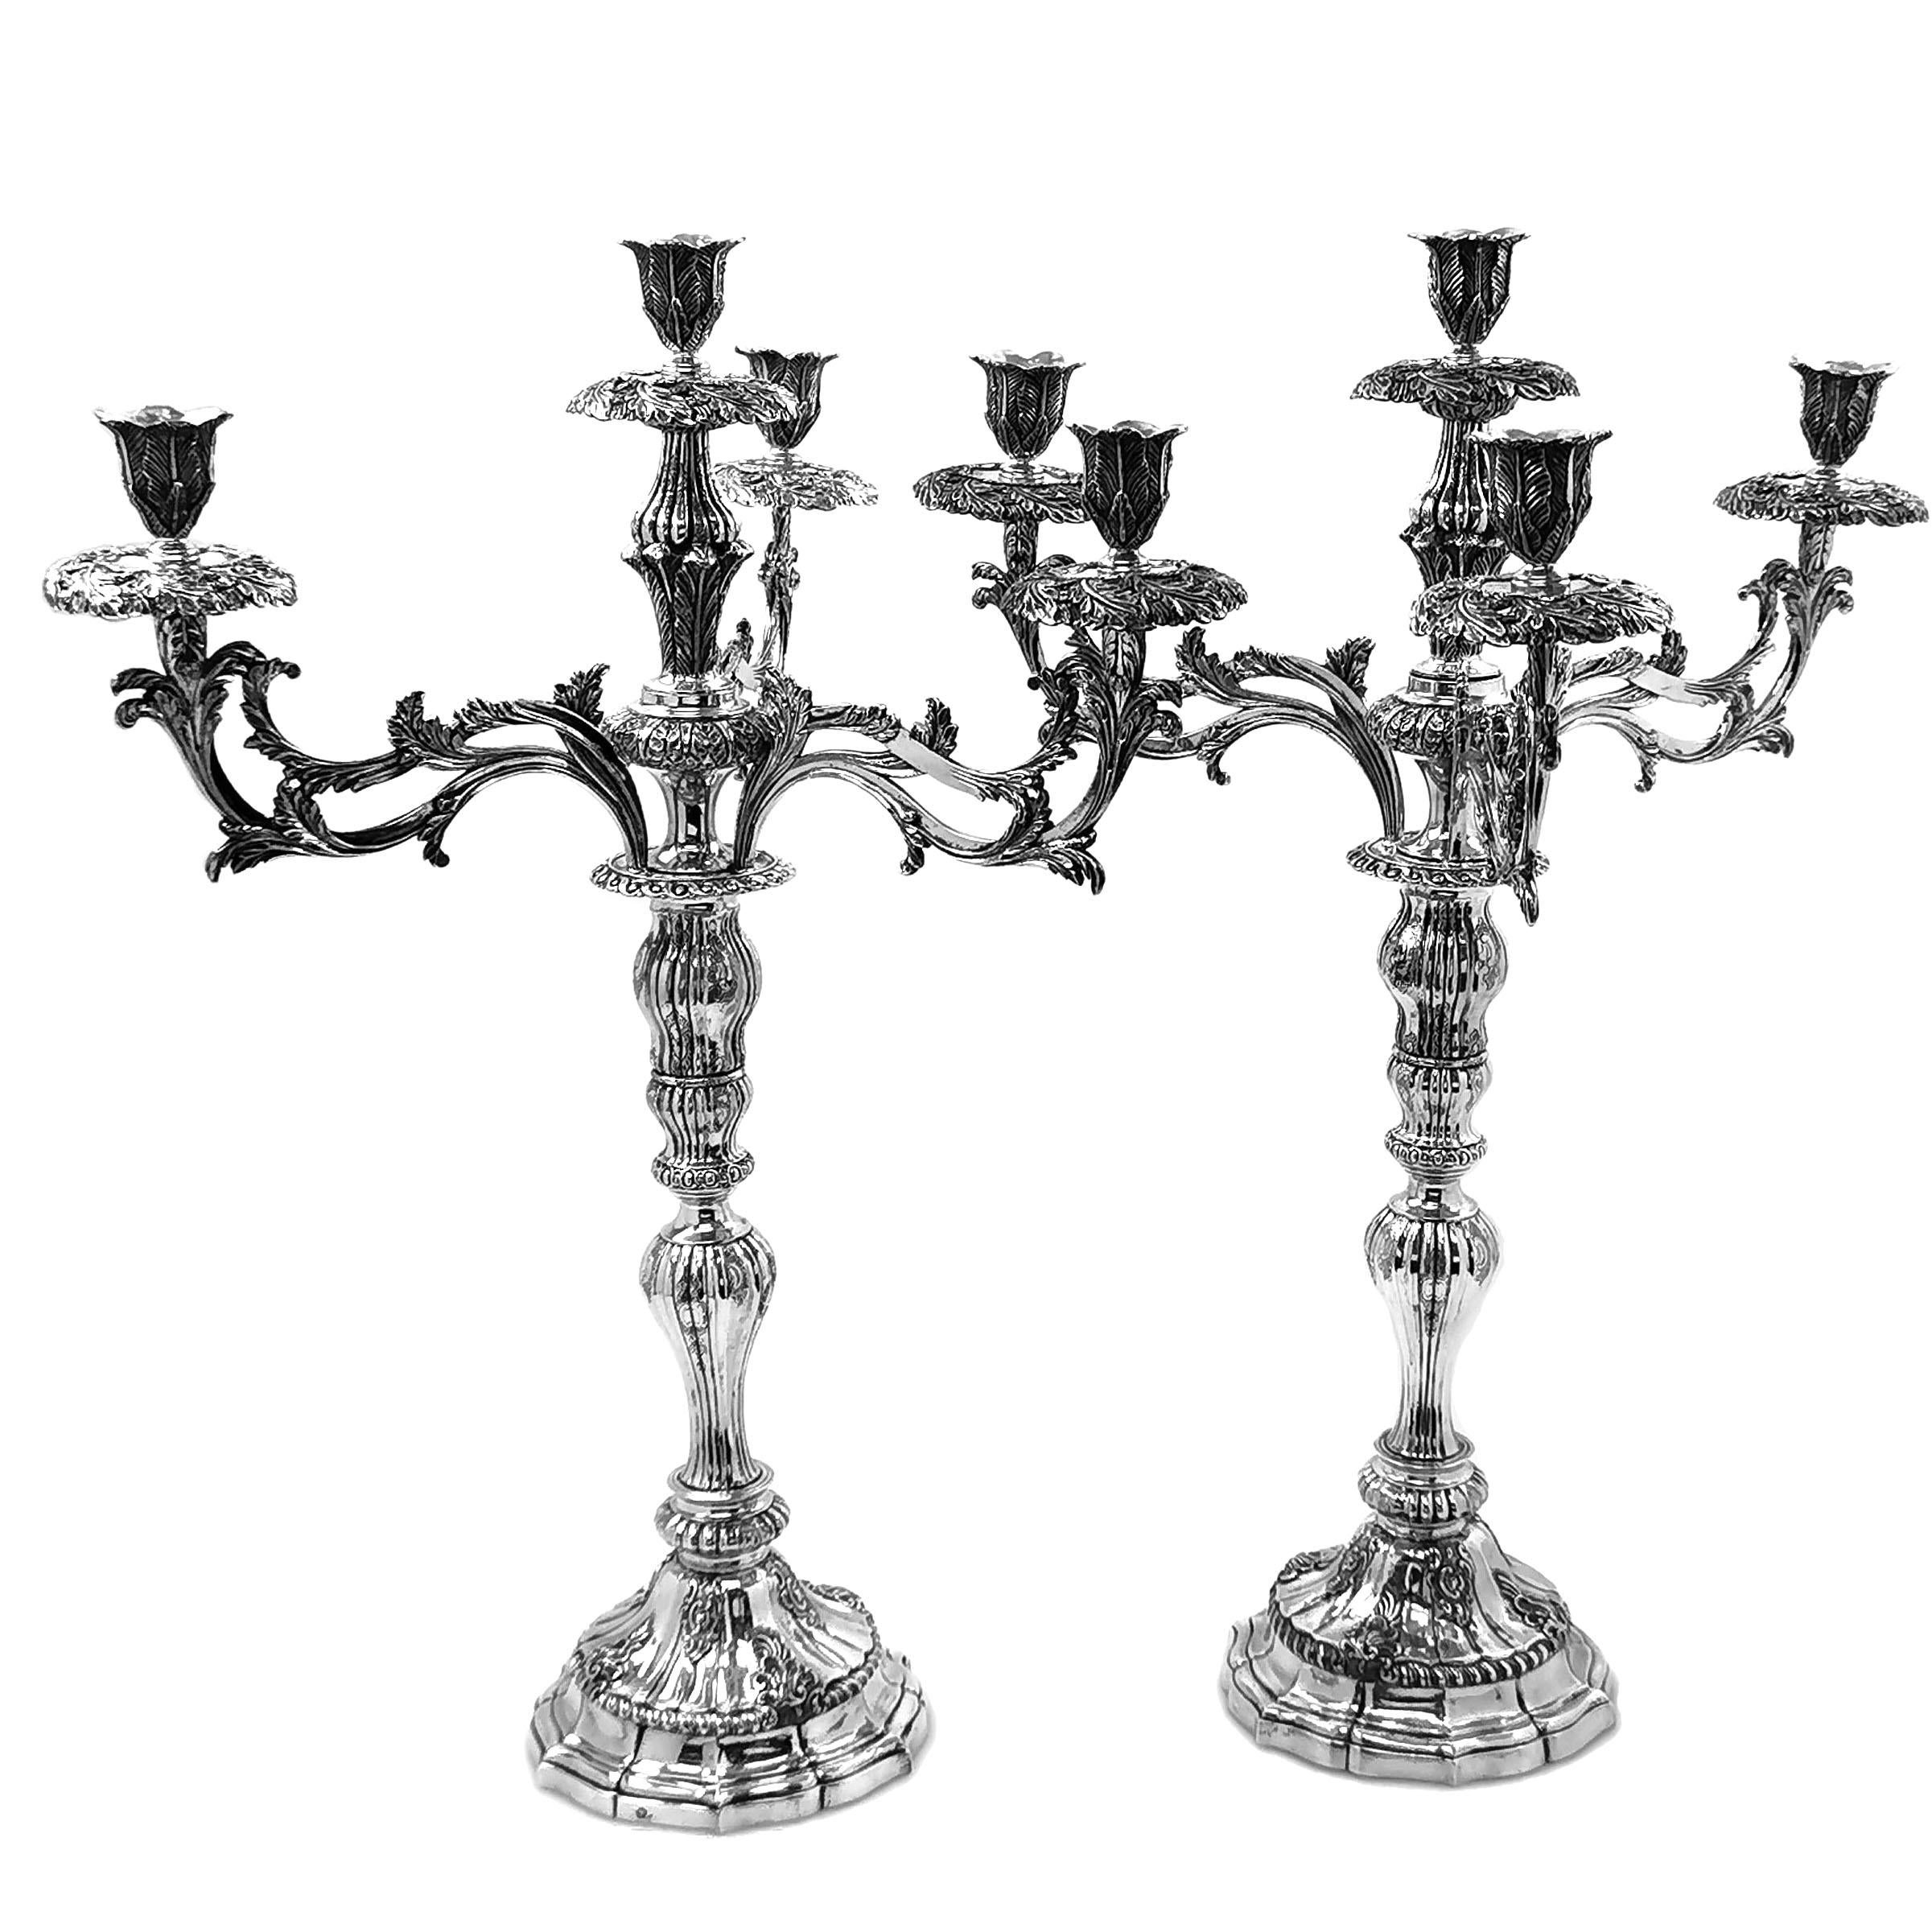 A rare magnificent pair of Antique solid Silver 18th century Portuguese Candelabra with four light sconces and removable branches to allow for use as single Candlesticks. The sconces and drip trays are embellished with stylised leaf patterns